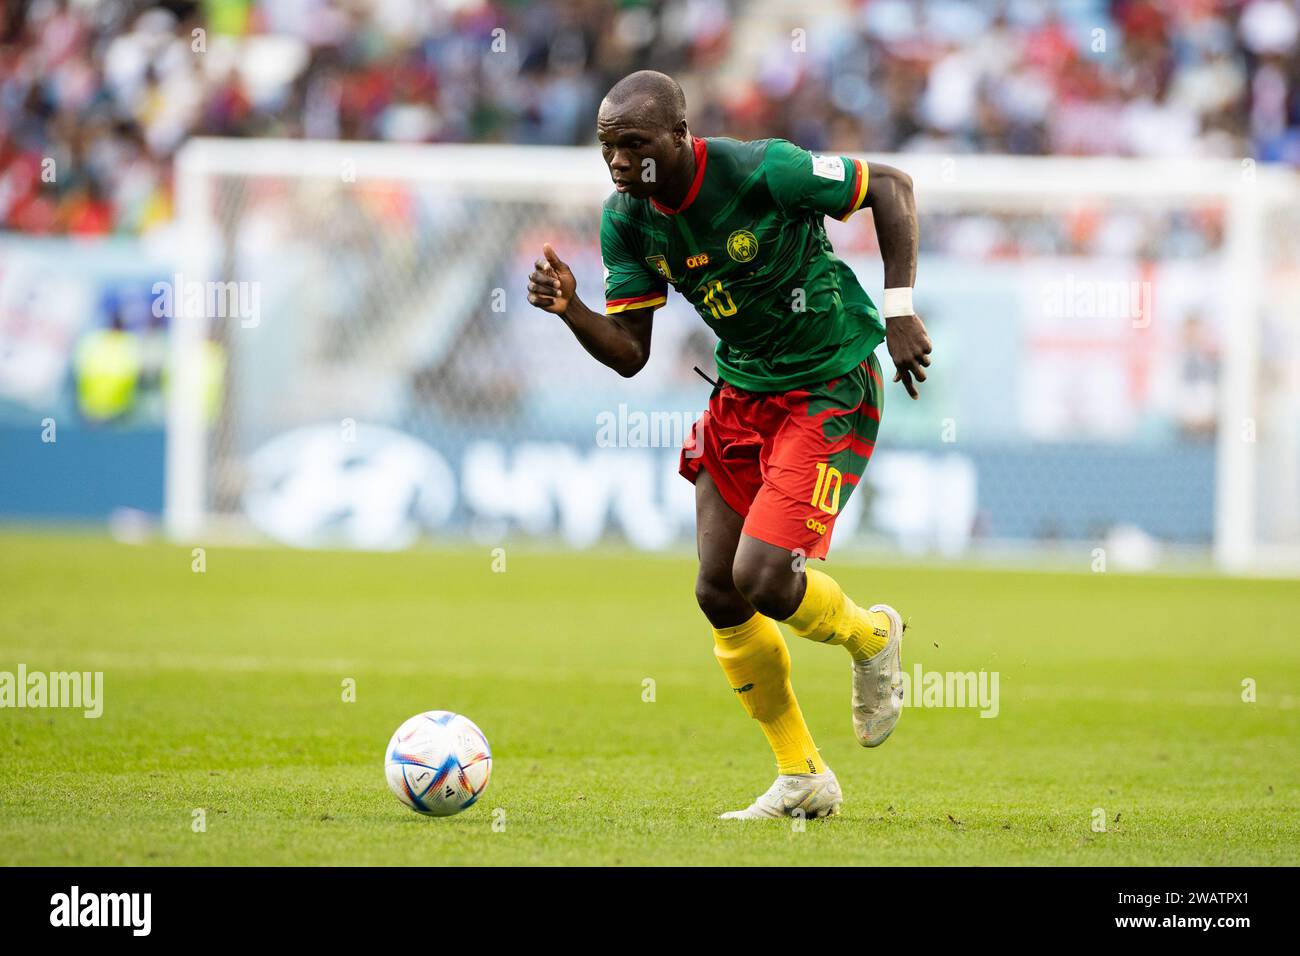 Qatar, Qatar. 28th Nov, 2022. Vincent Aboubakar of Cameroon seen in action during the FIFA World Cup Qatar 2022 match between Cameroon and Serbia at Al Janoub Stadium. Final score: Cameroon 3:3 Serbia. (Photo by Grzegorz Wajda/SOPA Images/Sipa USA) Credit: Sipa USA/Alamy Live News Stock Photo